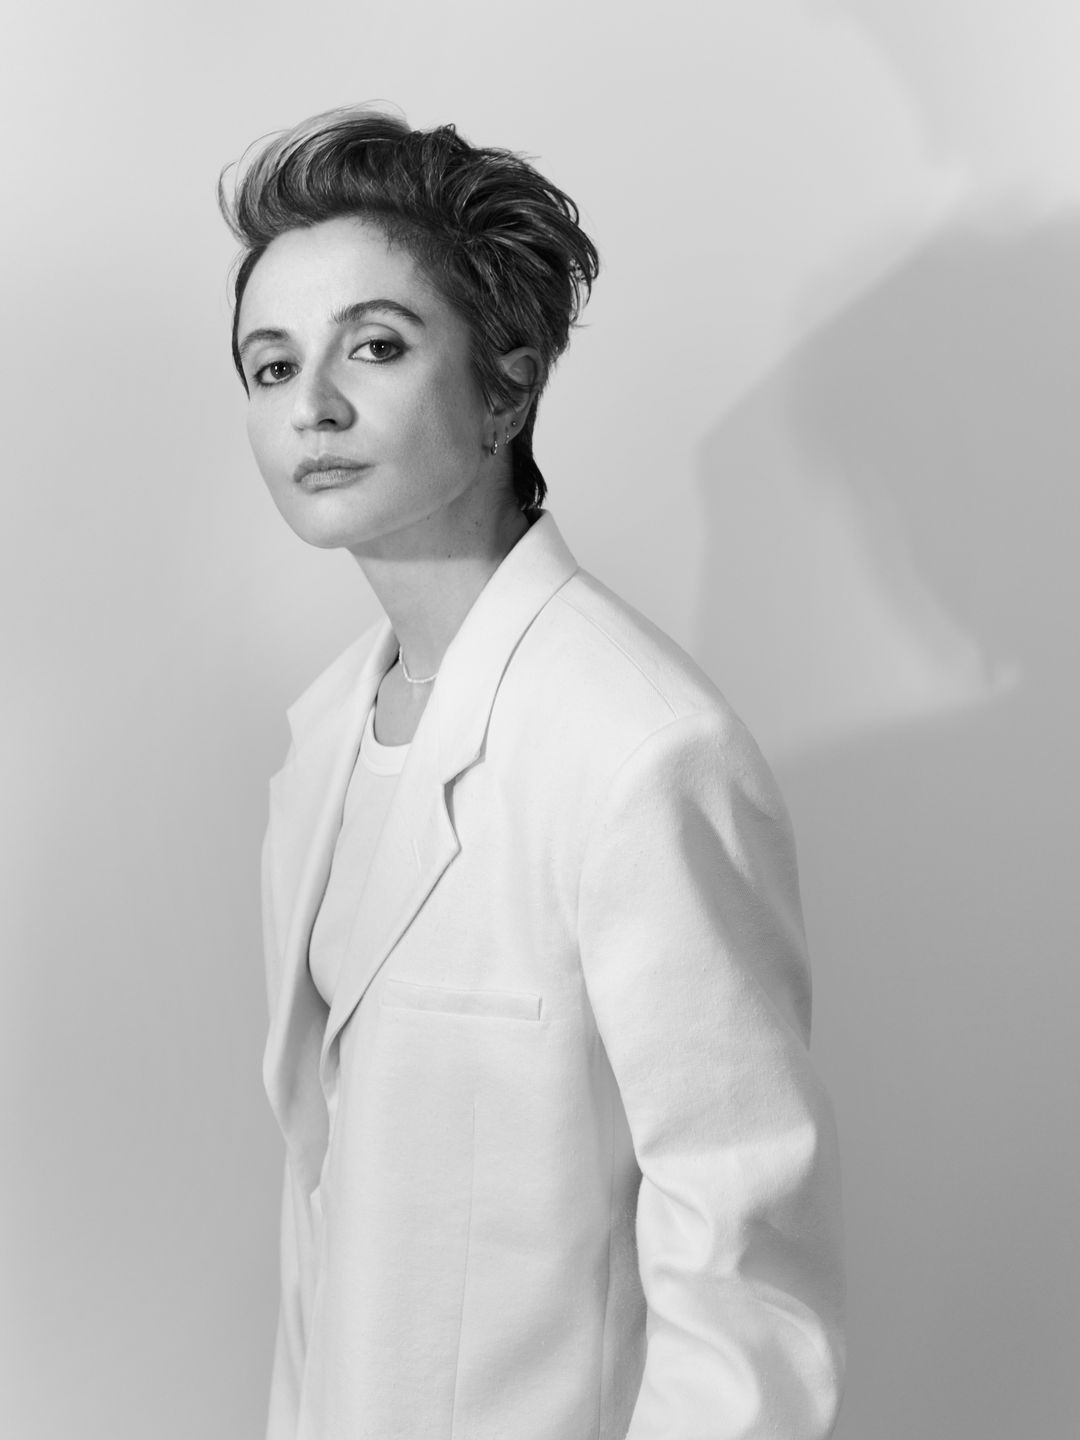 Veronica Leoni has been named Creative Director of 'Collection' by Calvin Klein